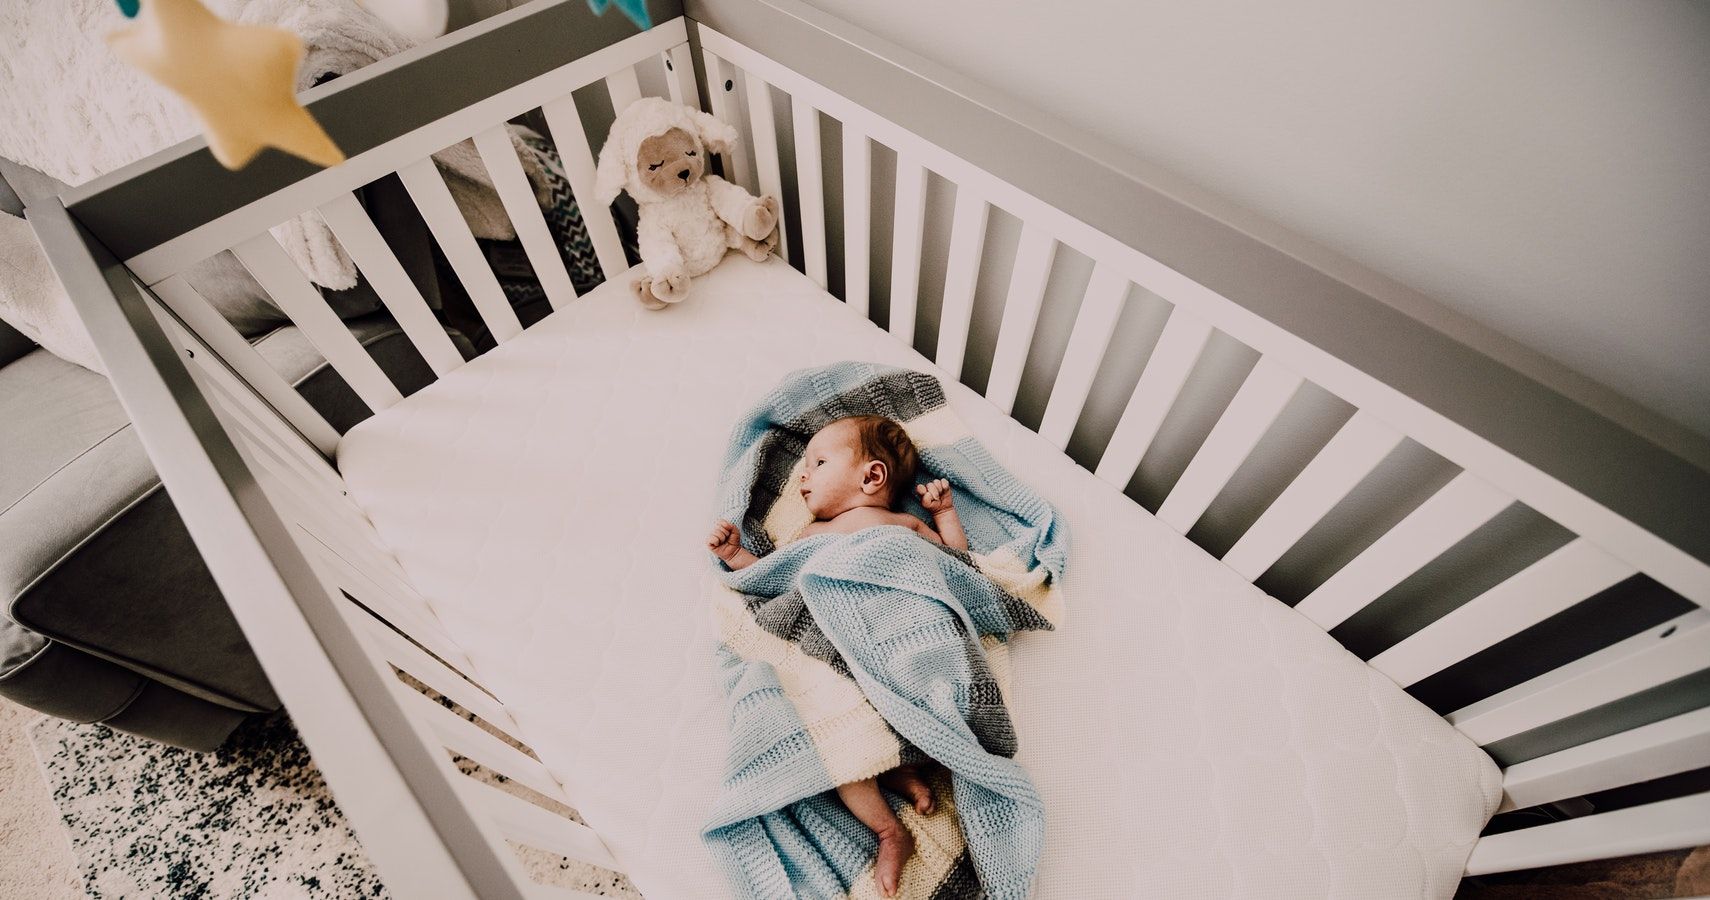 Interview with Dr. Natalie Barnett & Carolynne Harvey: Creating a Safe Sleep Environment For Your Baby